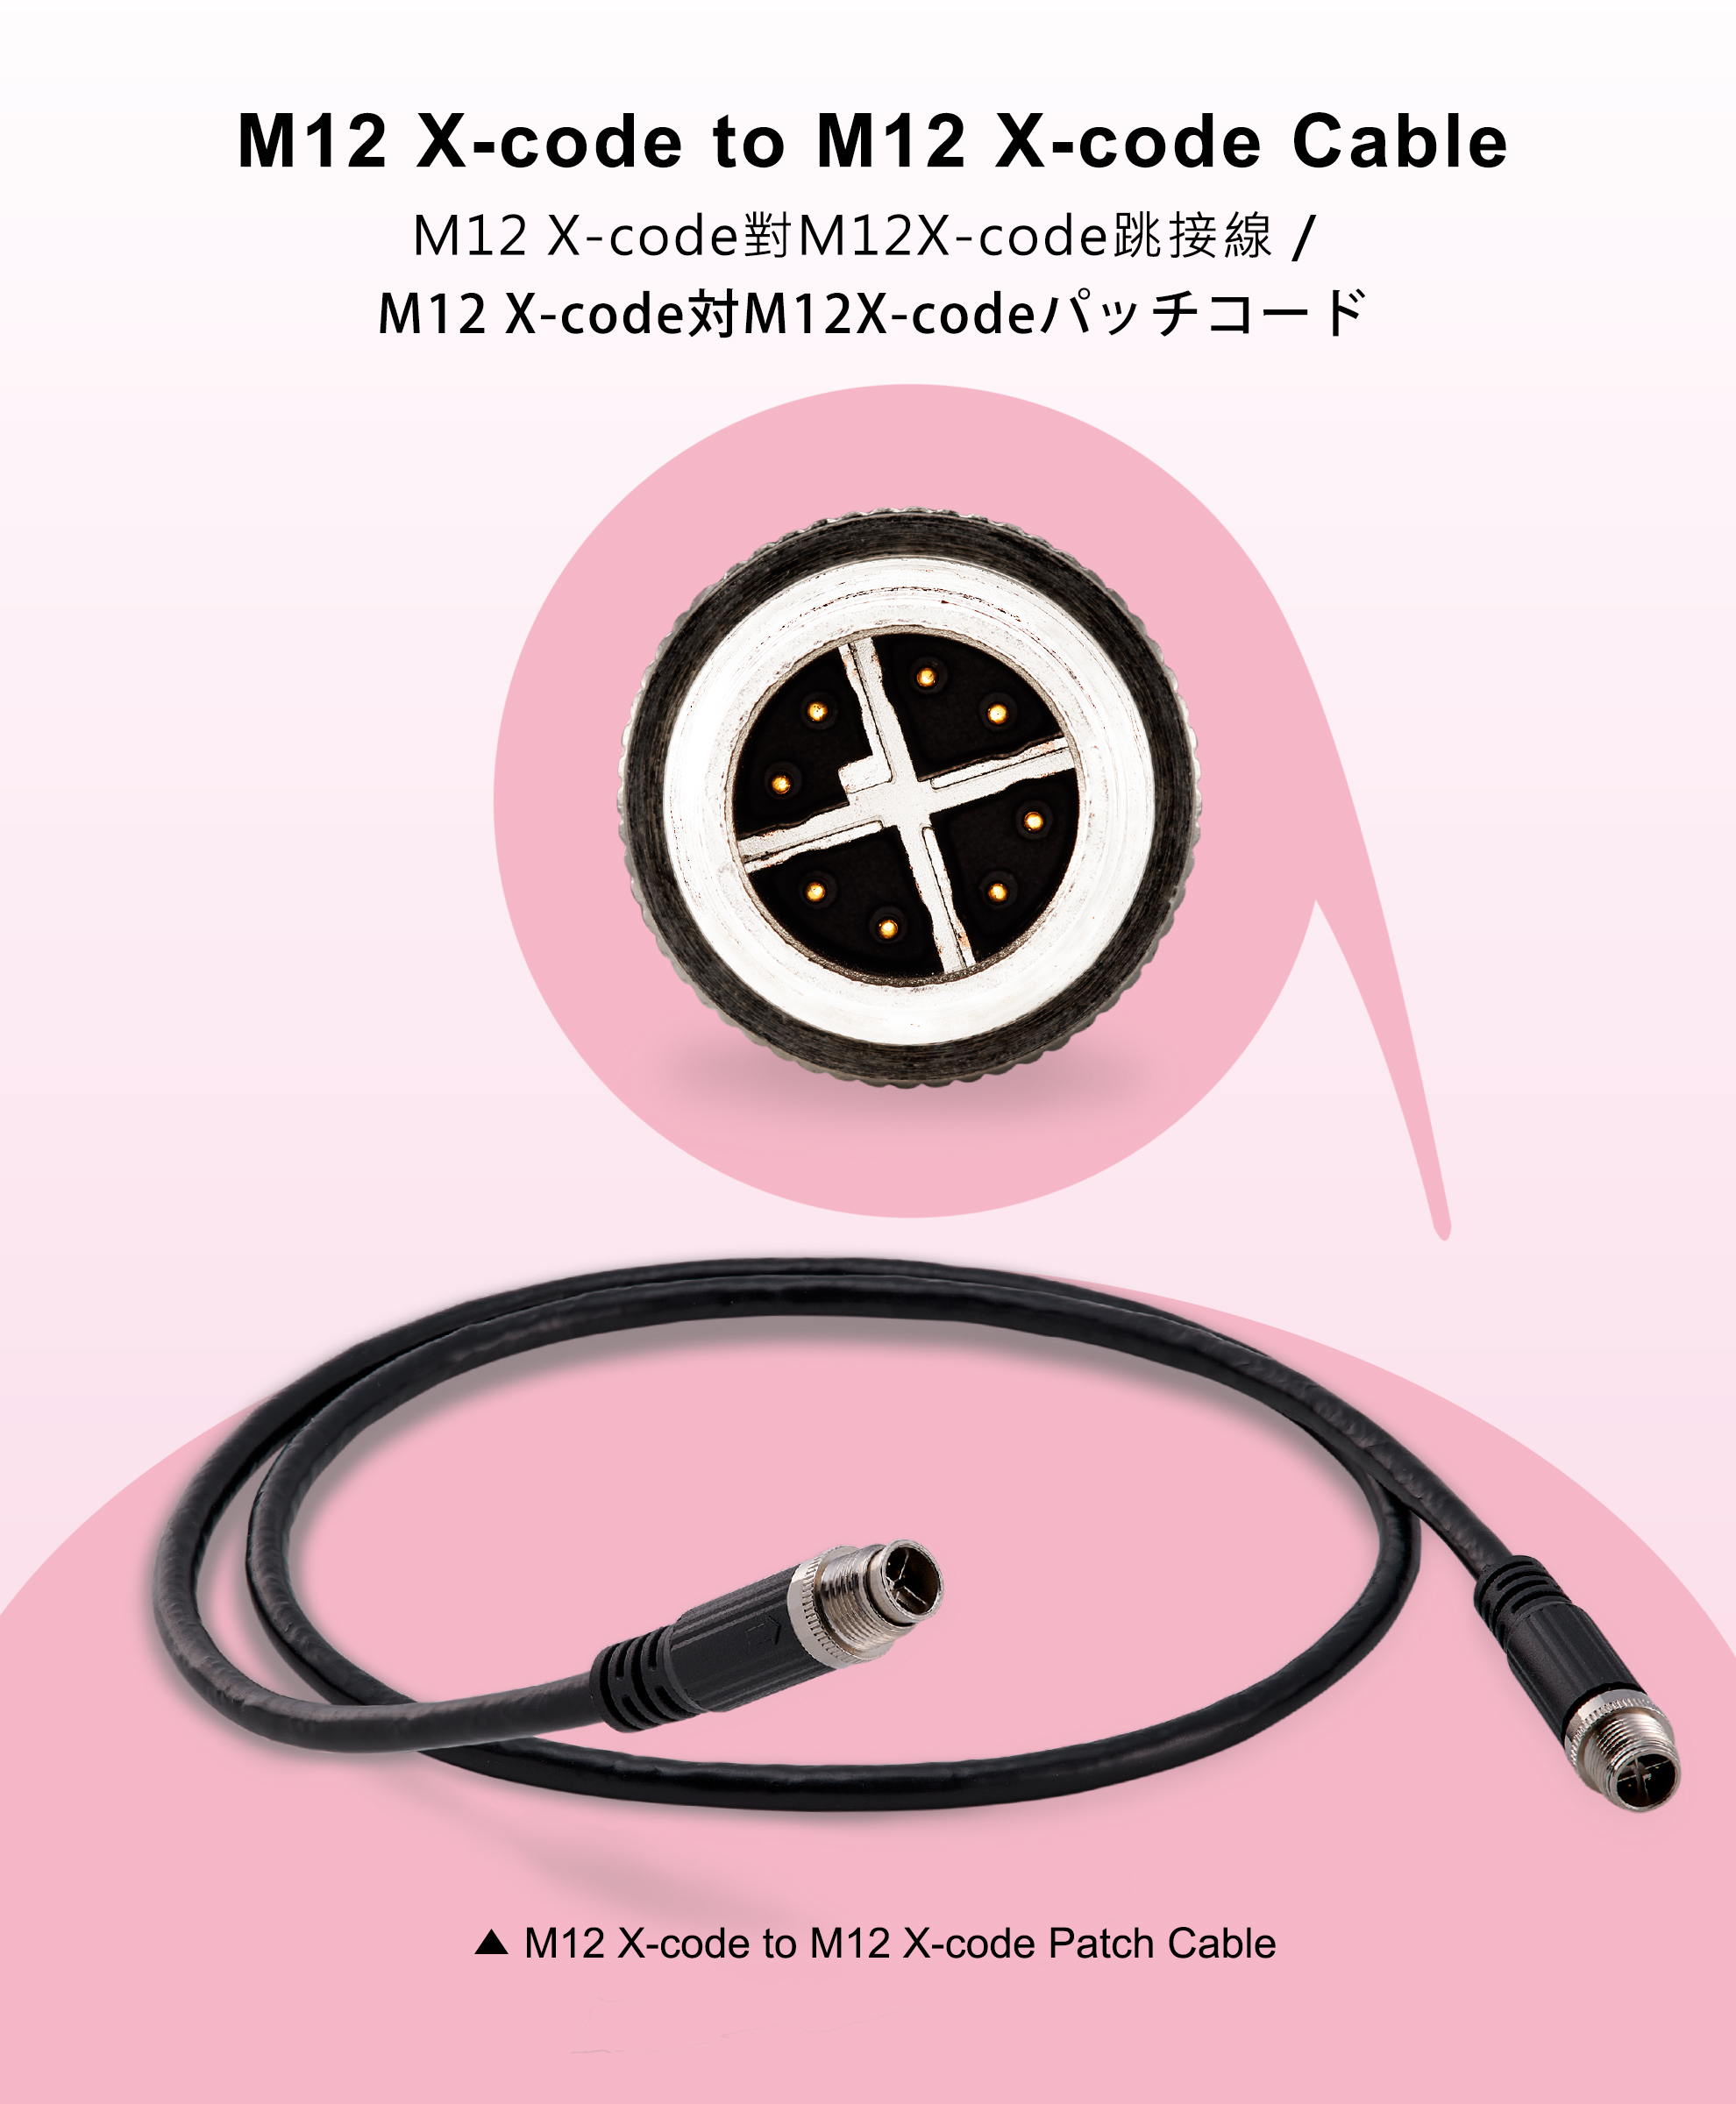 NEX1 M12 X-code Male to X-code Male Cable